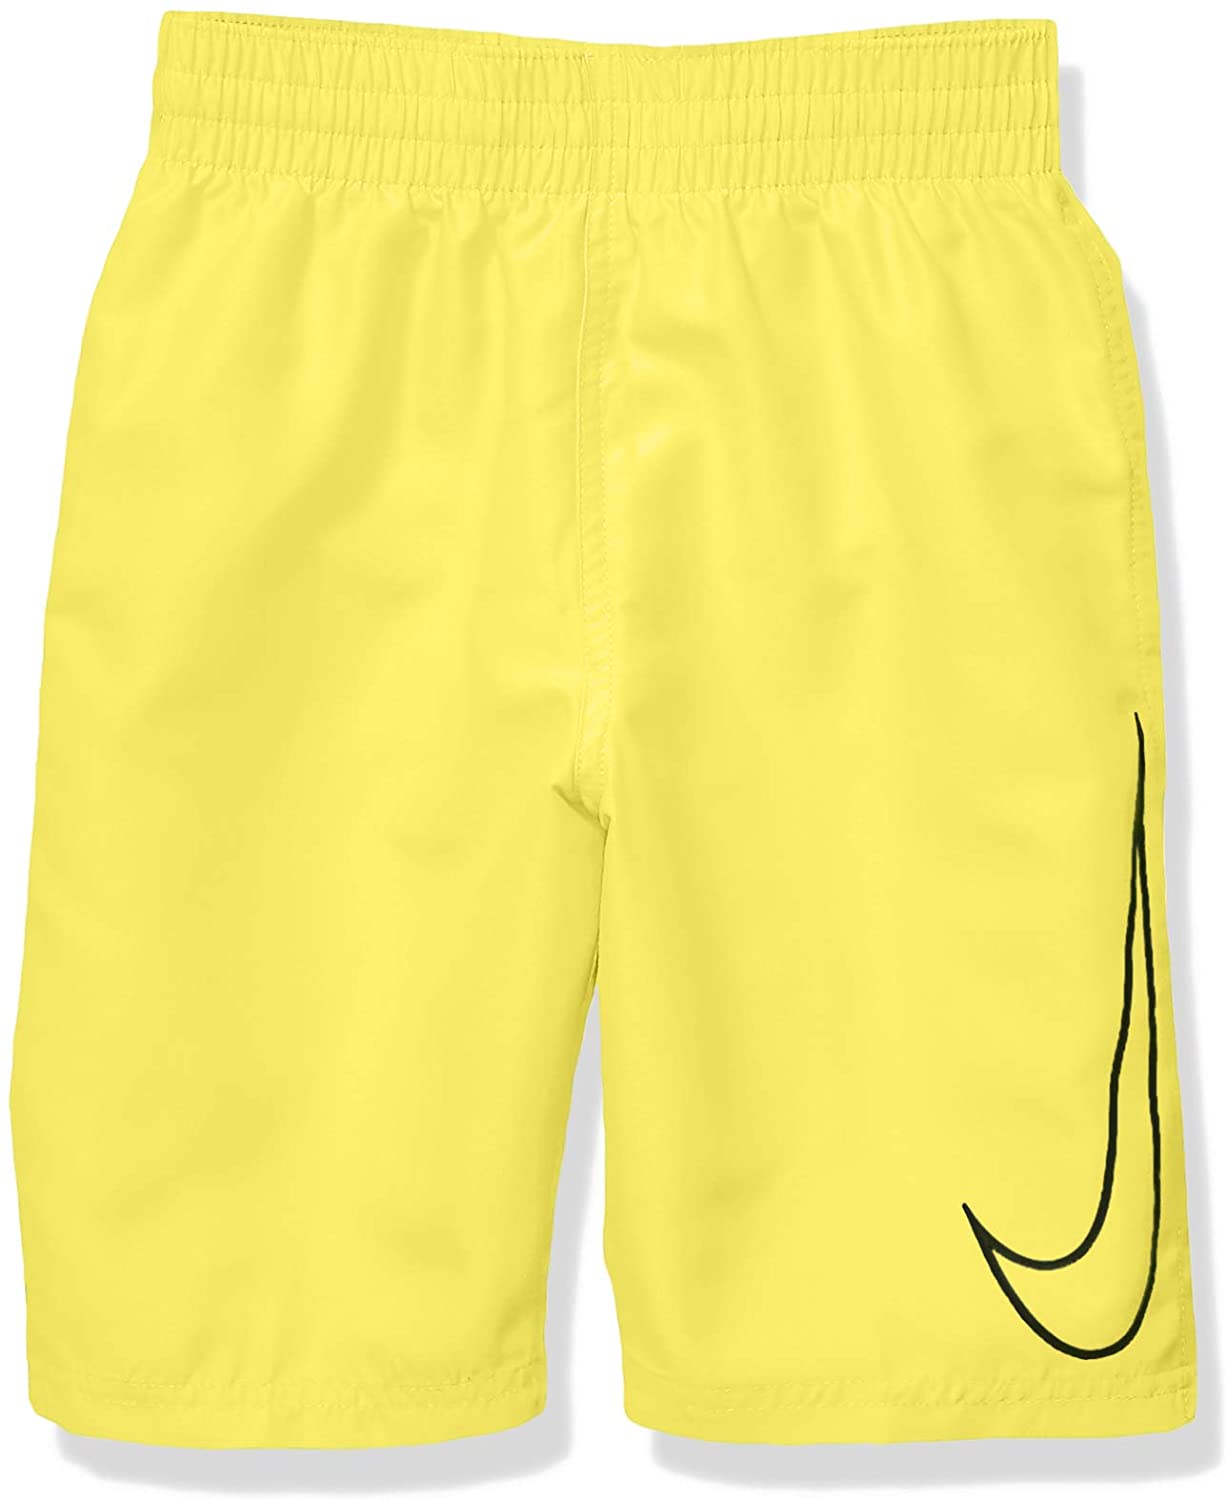 Boy's Nike Big Swoosh Solid Lap Volley Short Swim Trunk in Lemon Venom color from the front